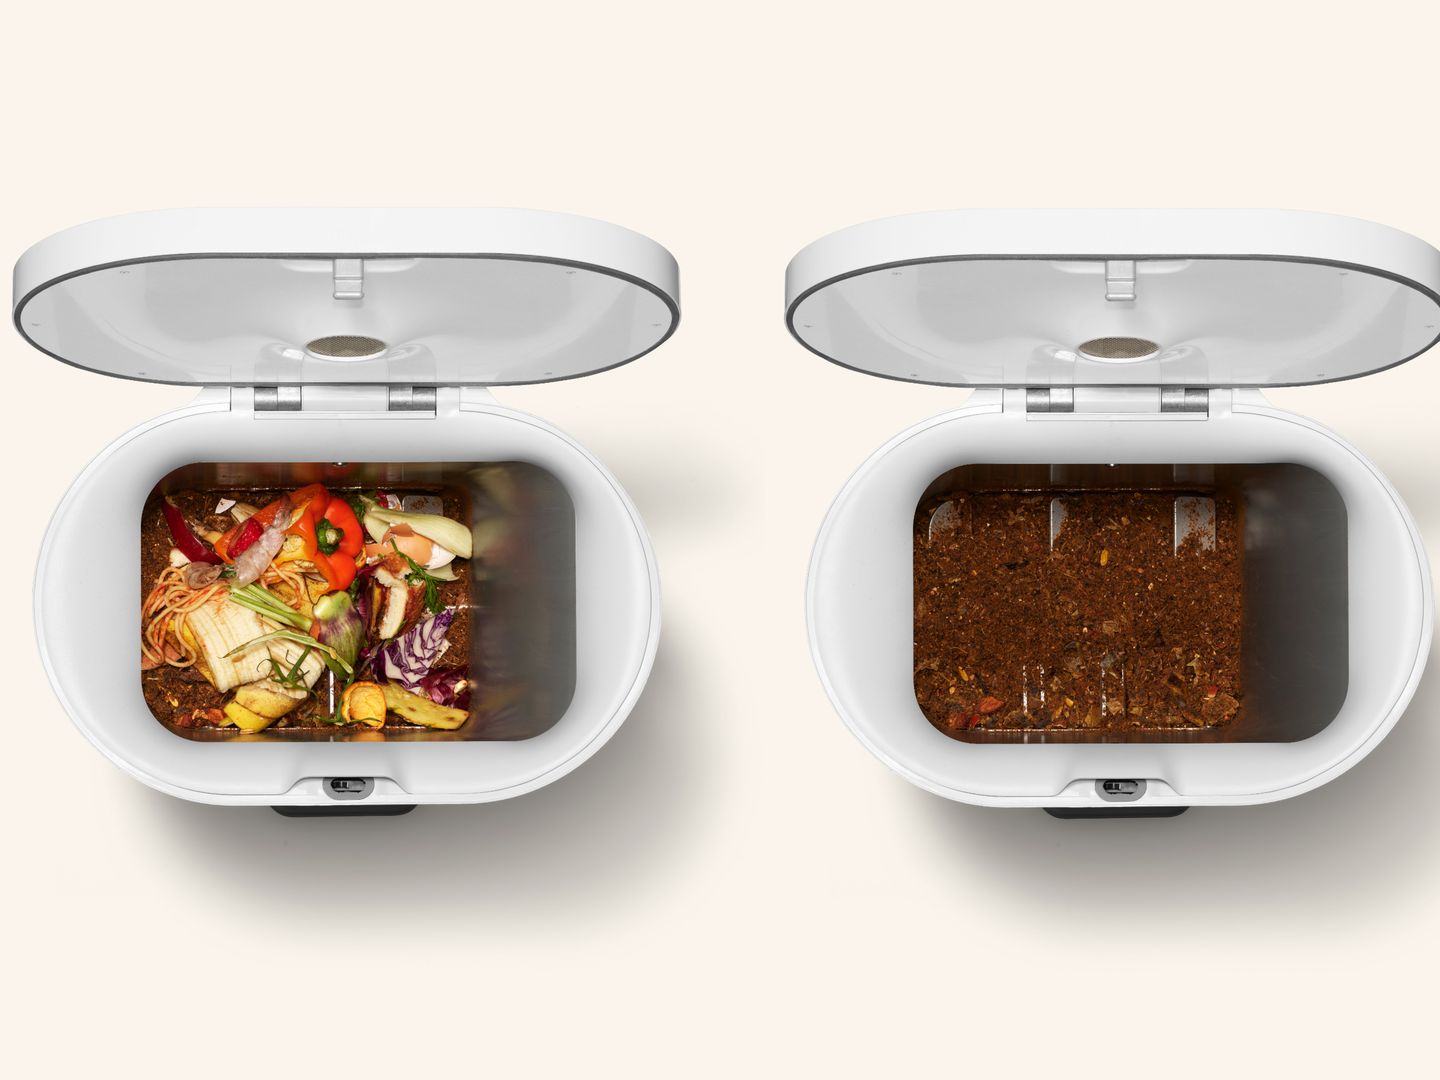 High-Tech Trash: This Kitchen Bin Turns Food Scraps Into Feed - CNET